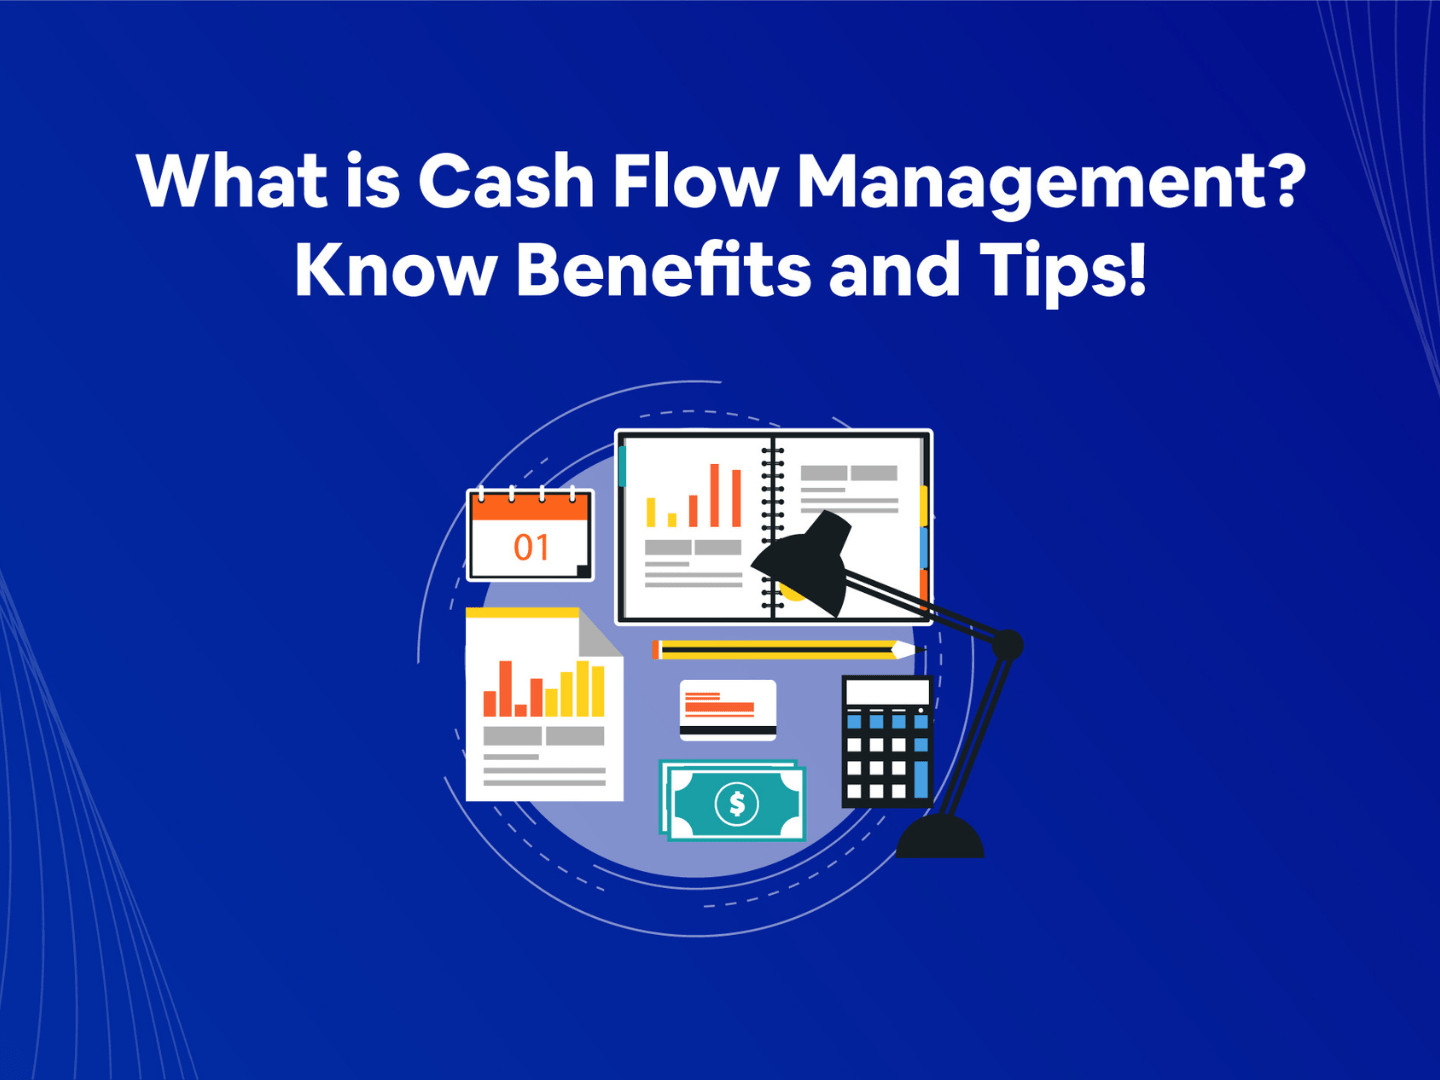 What is cash flow management? Know Benefits & Tips